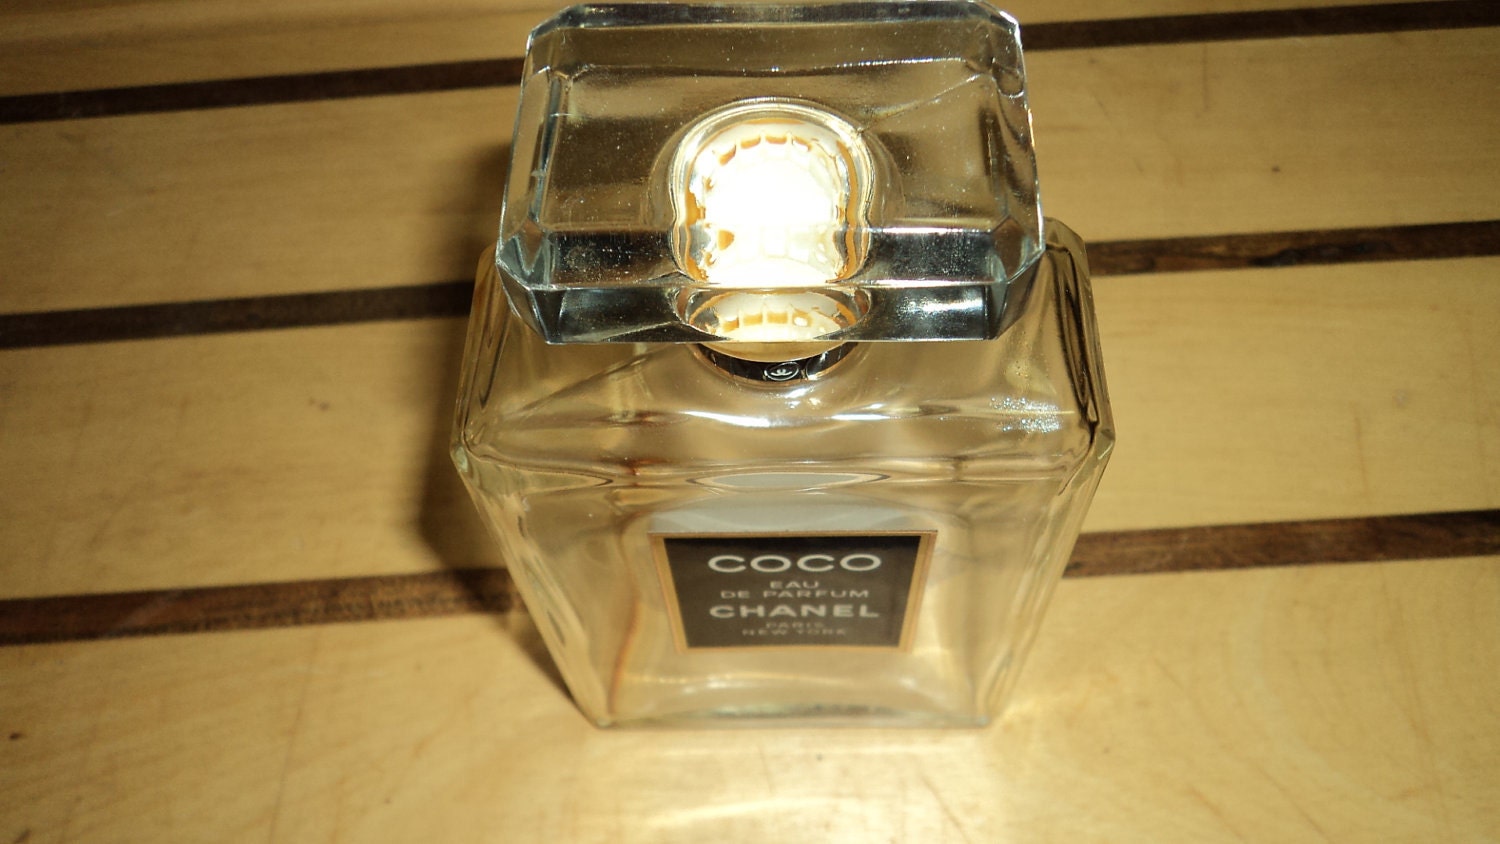 chanel perfume bottle on Etsy, a global handmade and vintage marketplace.